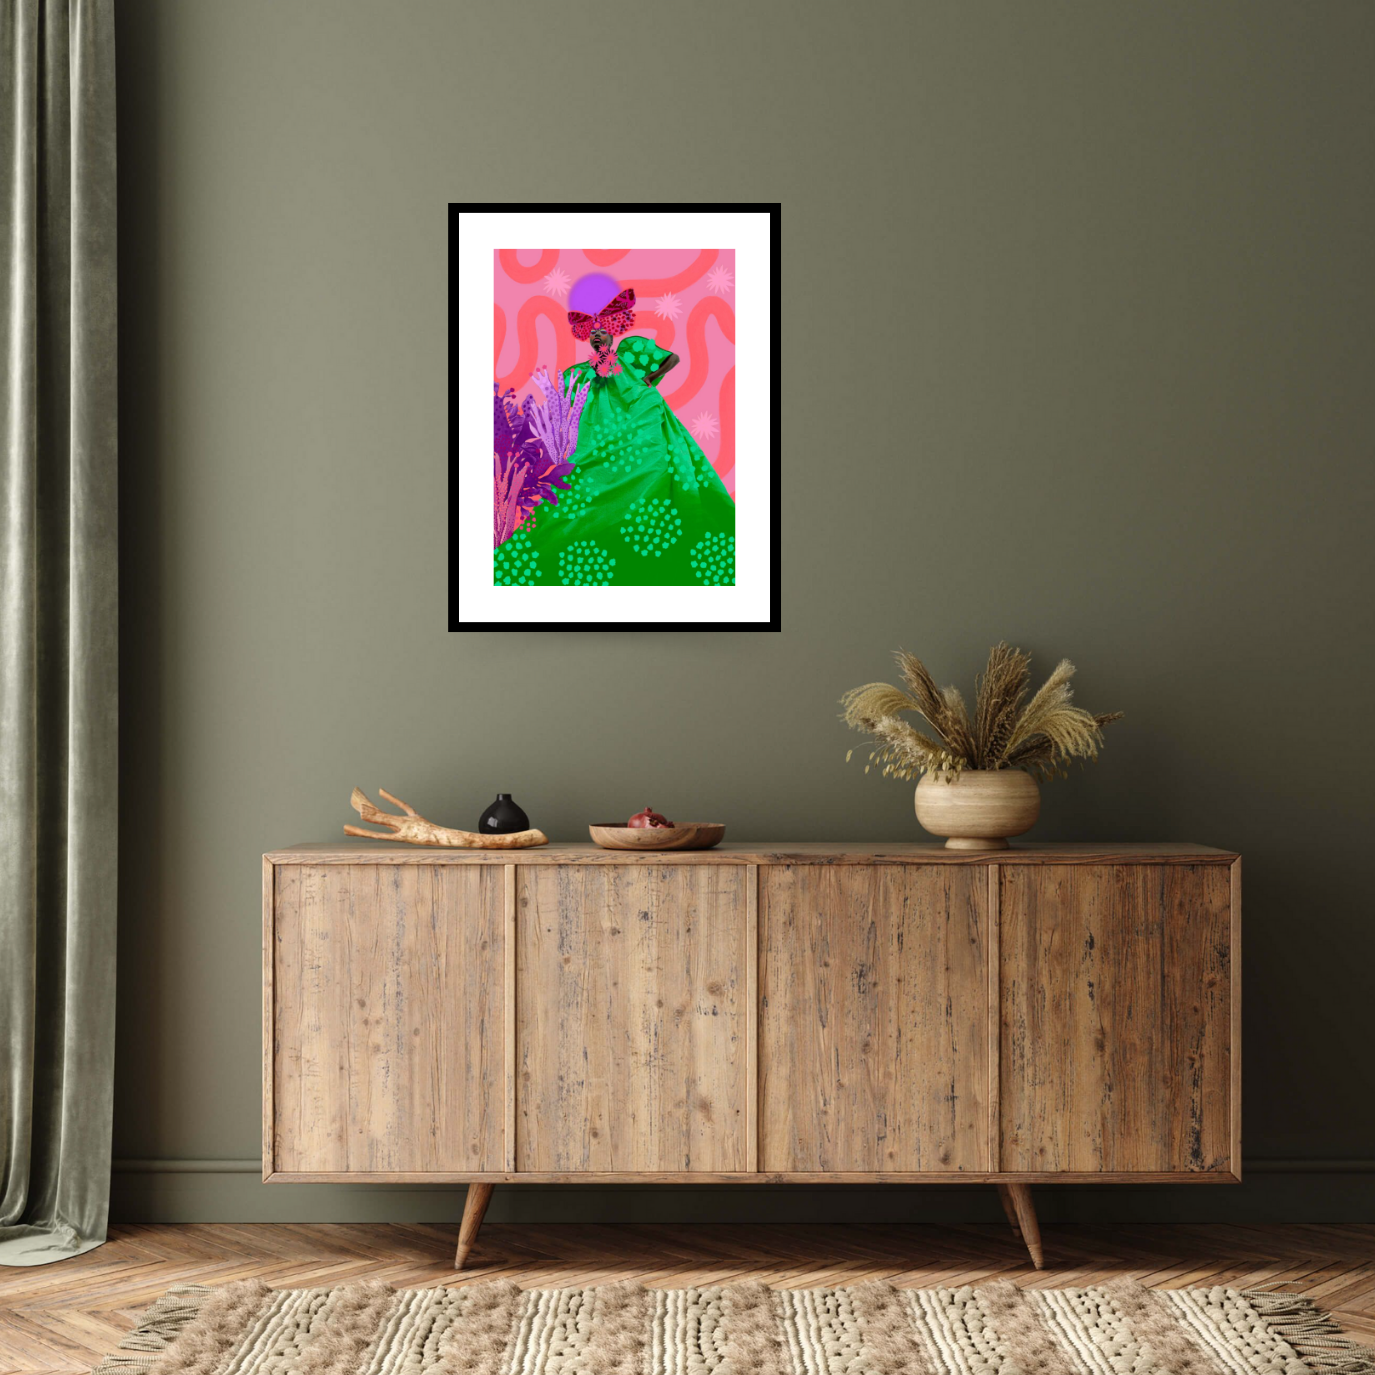 Image of the framed  fine art print ‘Alais’ by the Contemporary artist Amber Elise, depicting a black woman wearing a long green dress and a butterfly shaped hat, standing on a bright pink background.